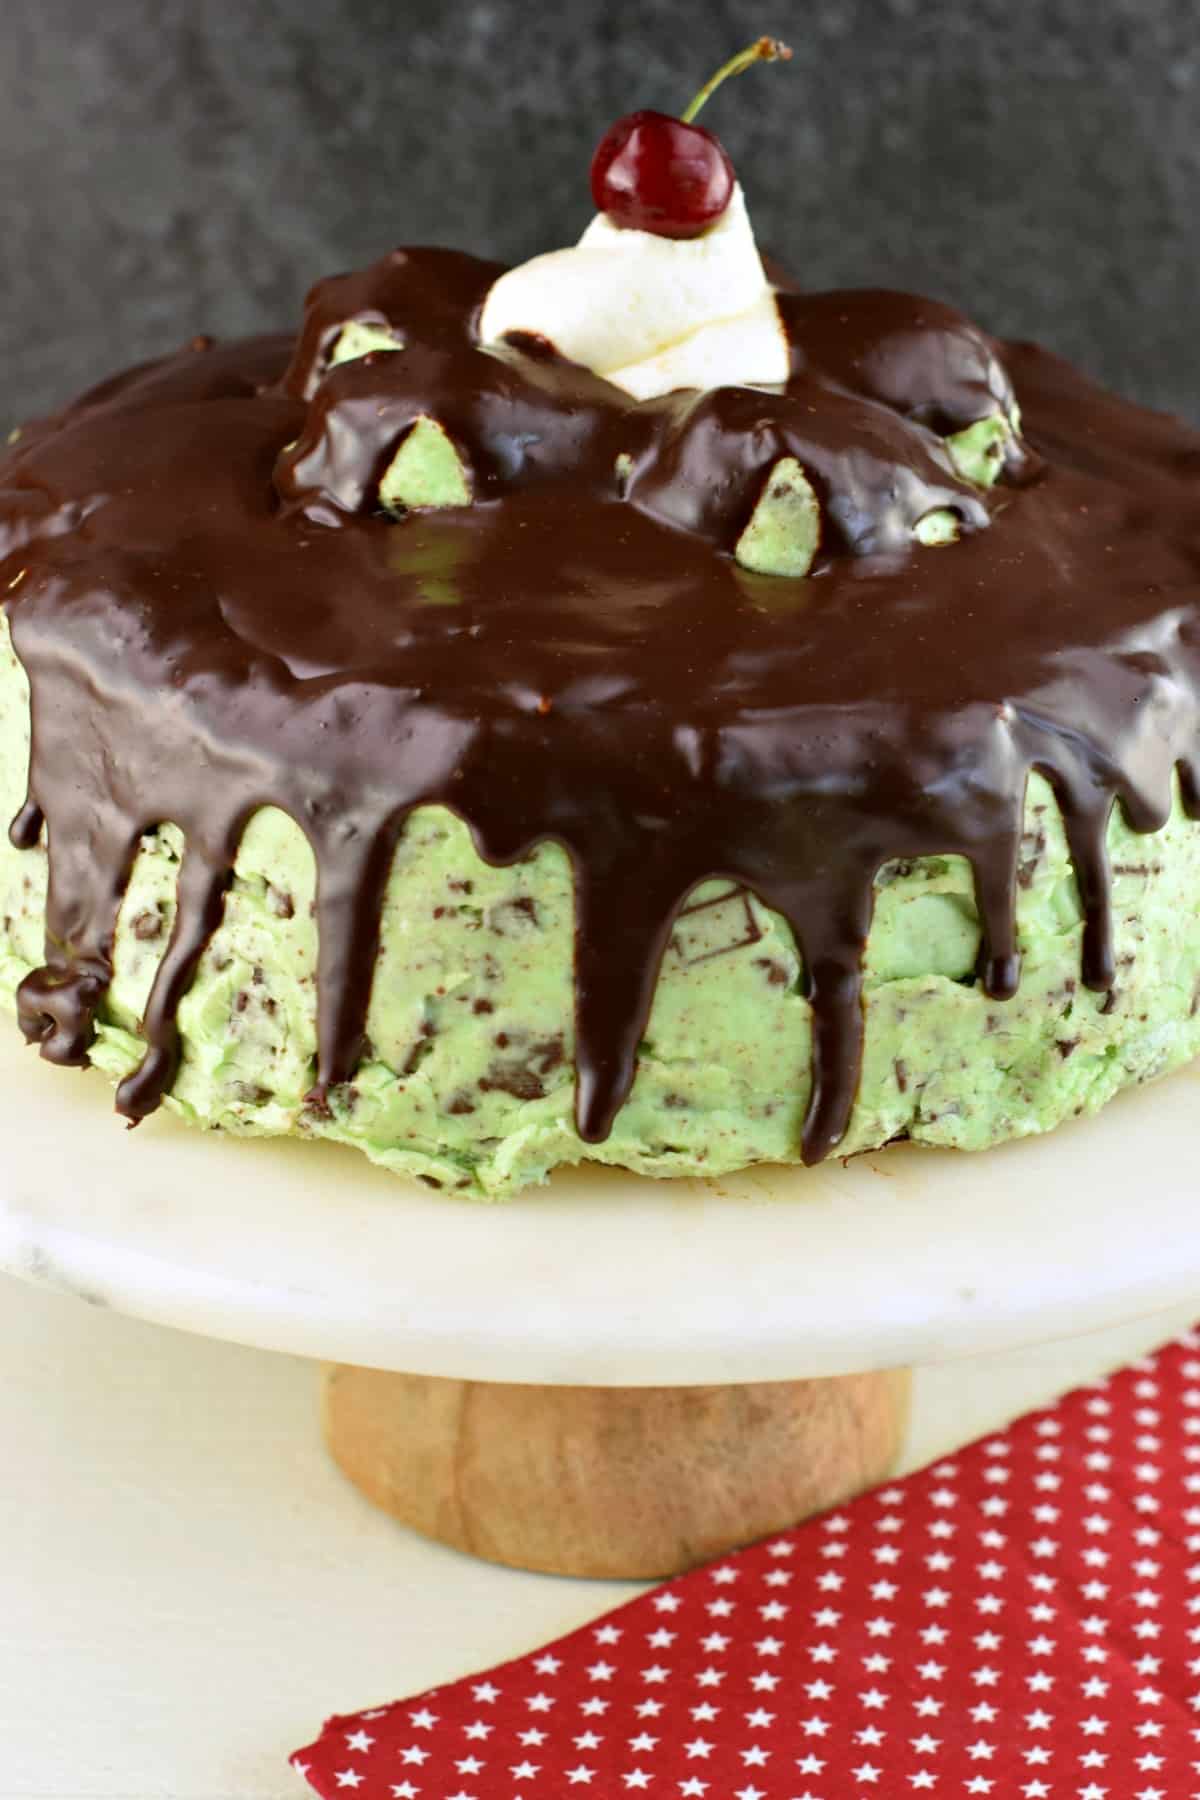 Chocolate cake covered in mint chocolate chip frosting and chocolate ganache on a white cake stand.